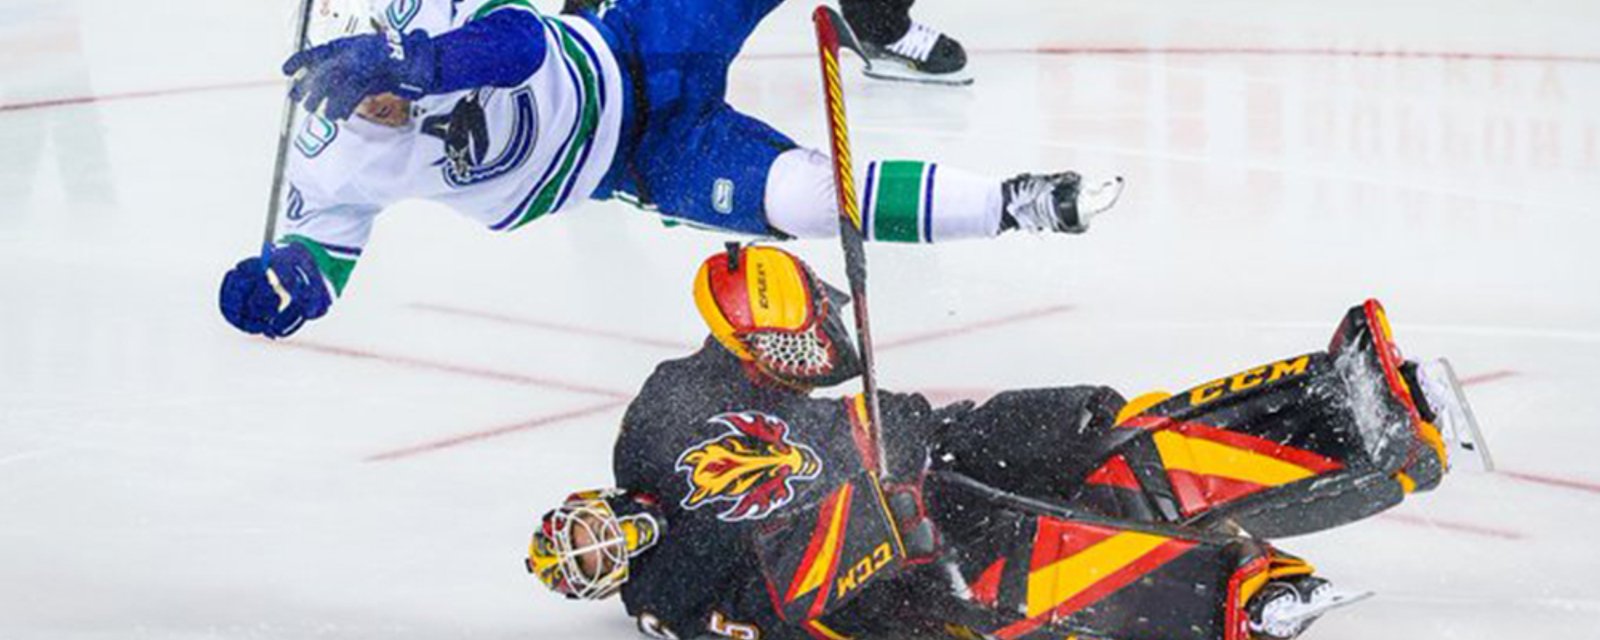 ICYMI: Markstrom absolutely obliterates Pearson waaaaay out of the net